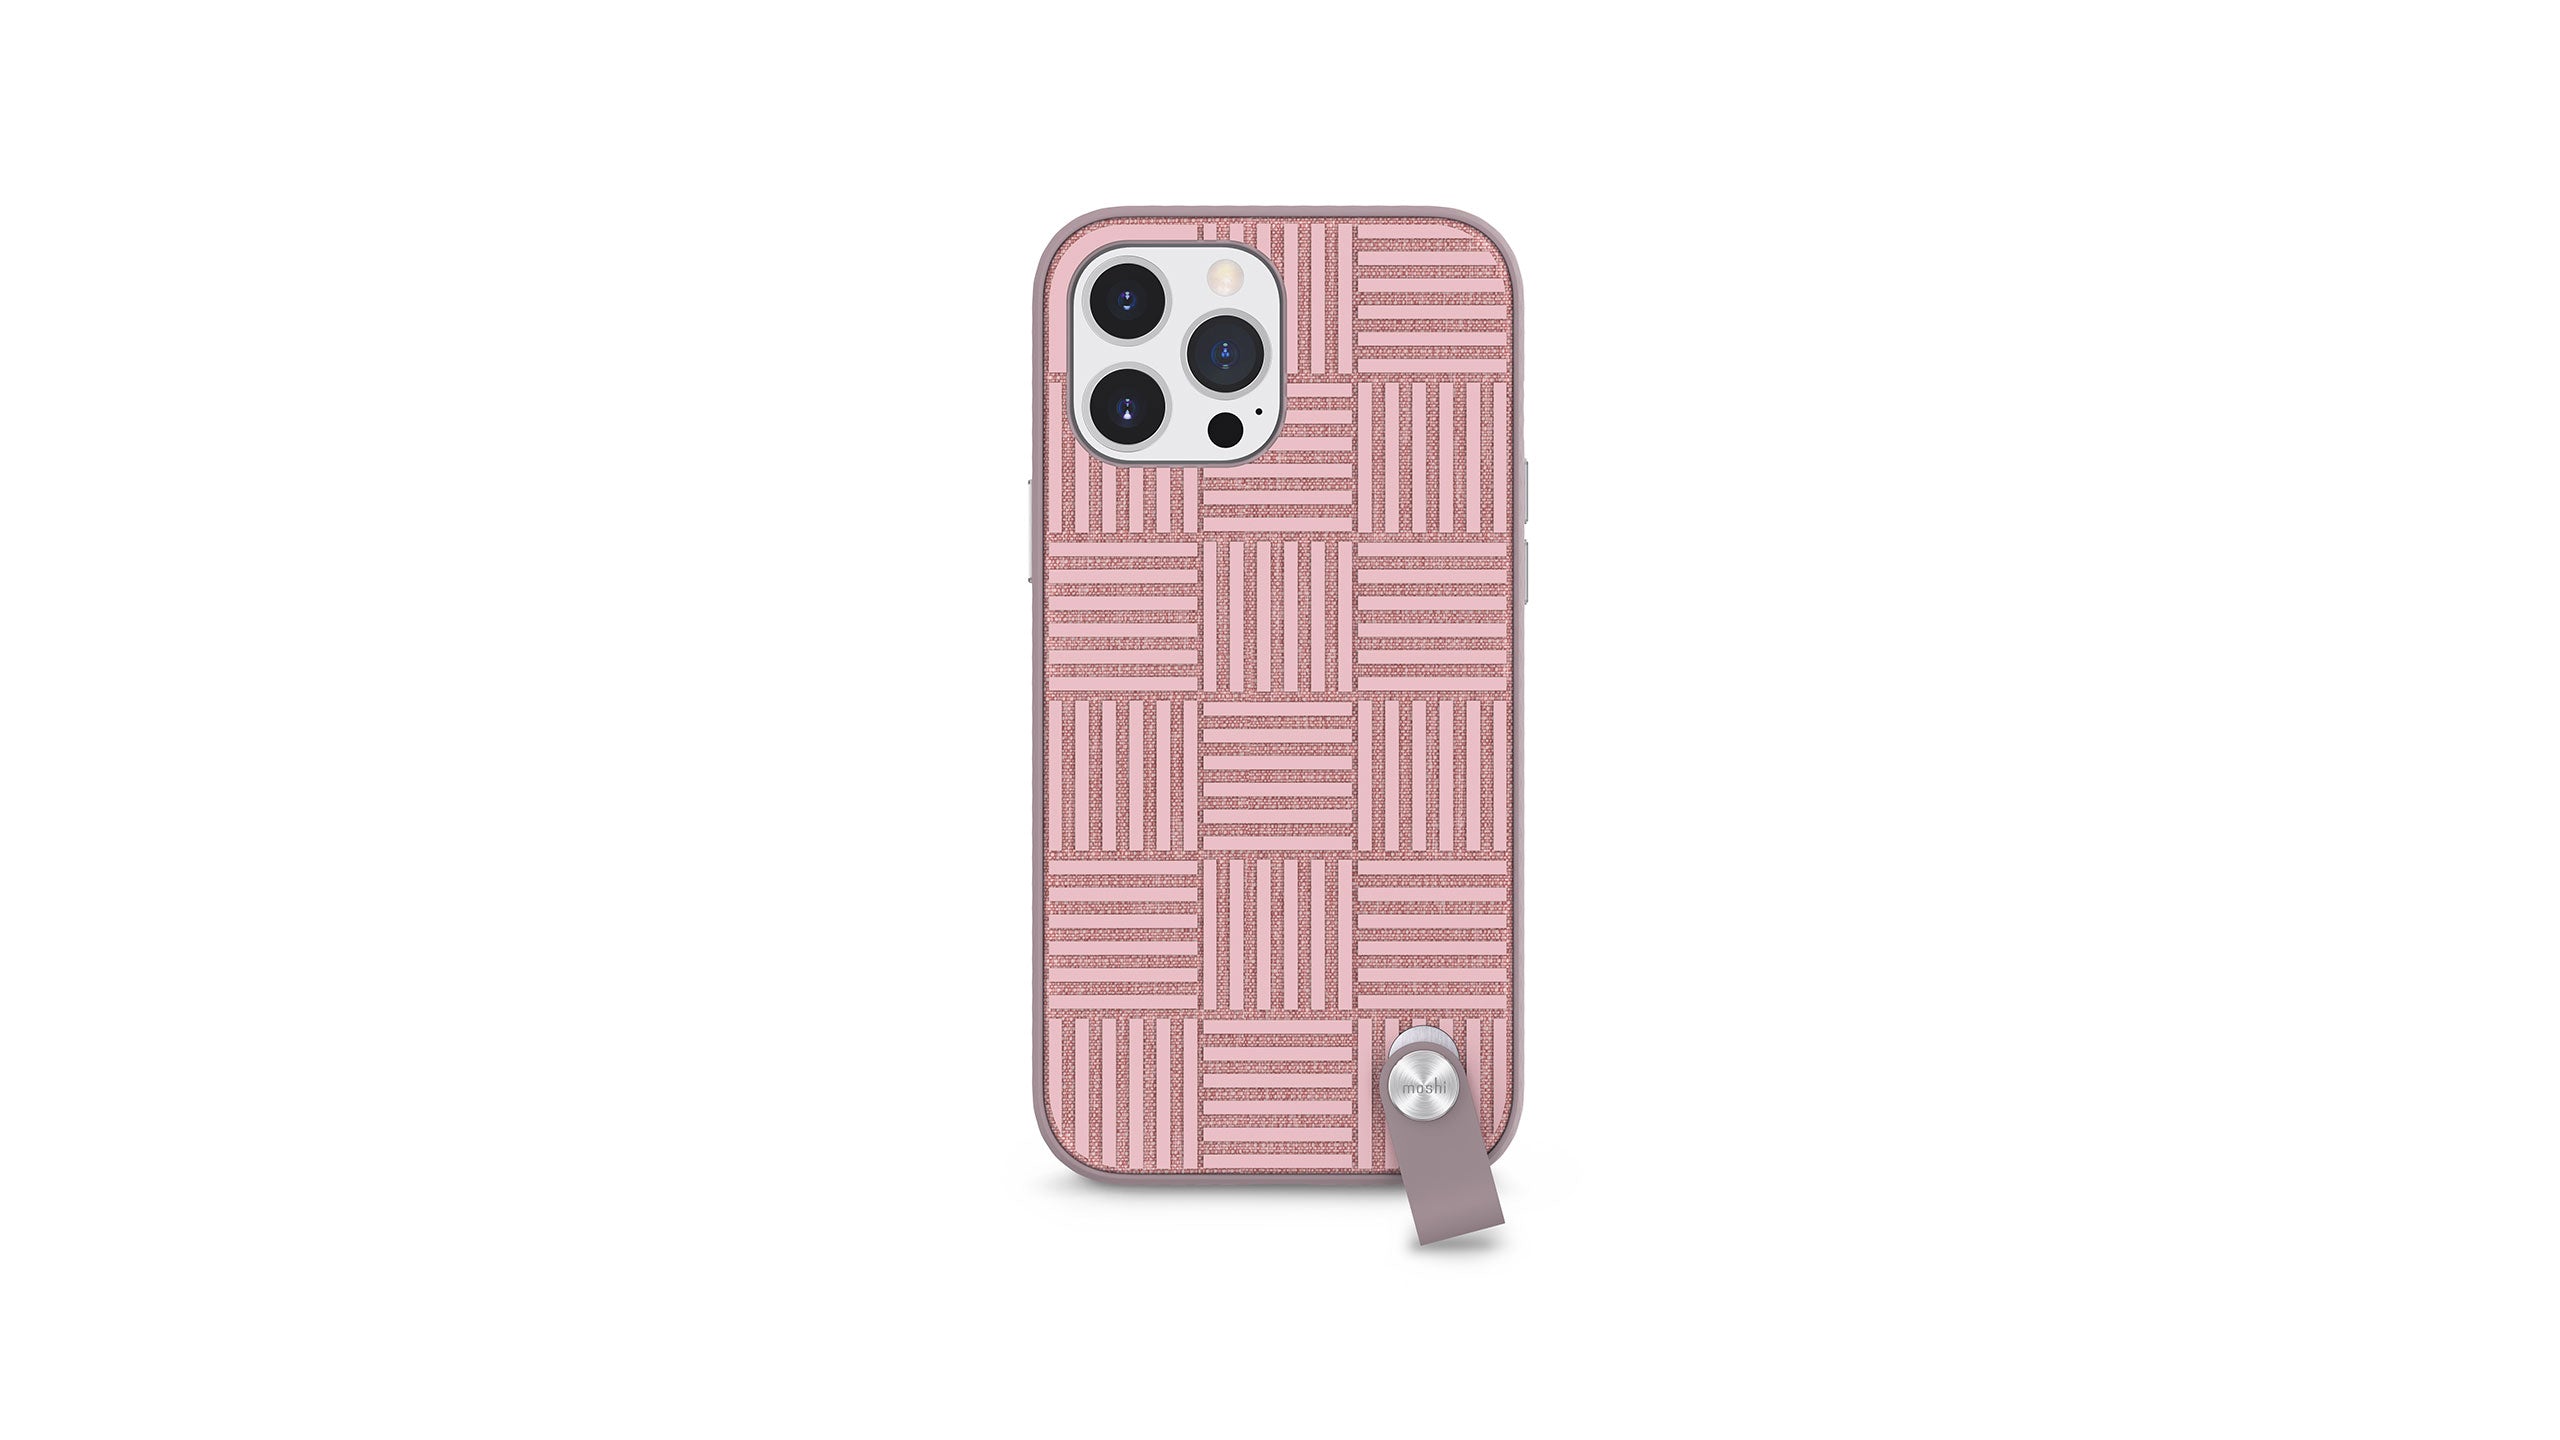 Moshi Altra Case for iPhone 13 Pro Max